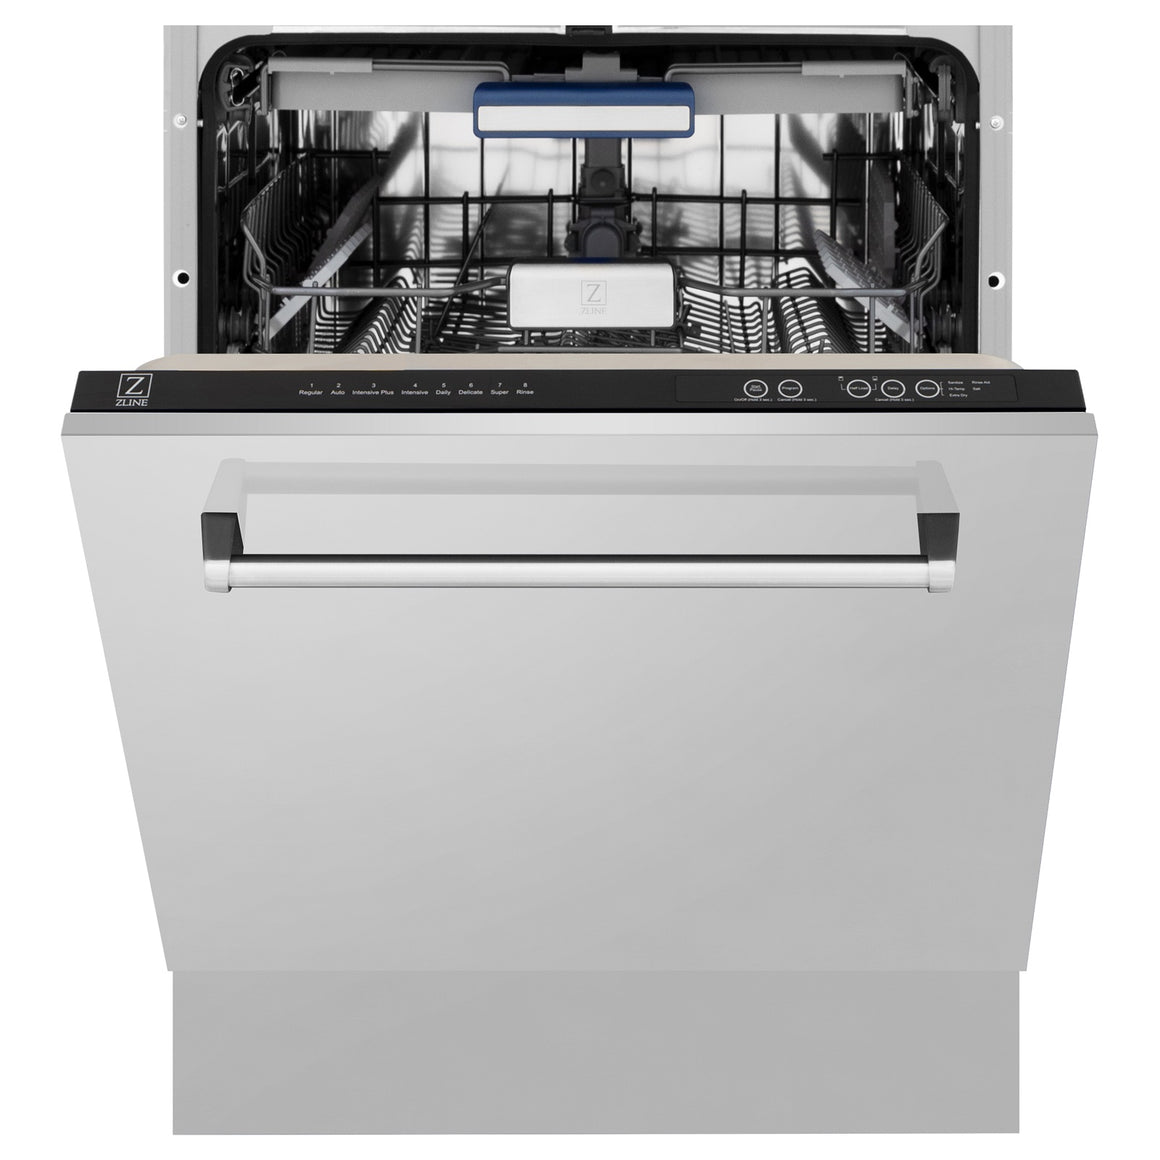 24" Top Control Tall Tub Dishwasher in Stainless Steel with 3rd Rack